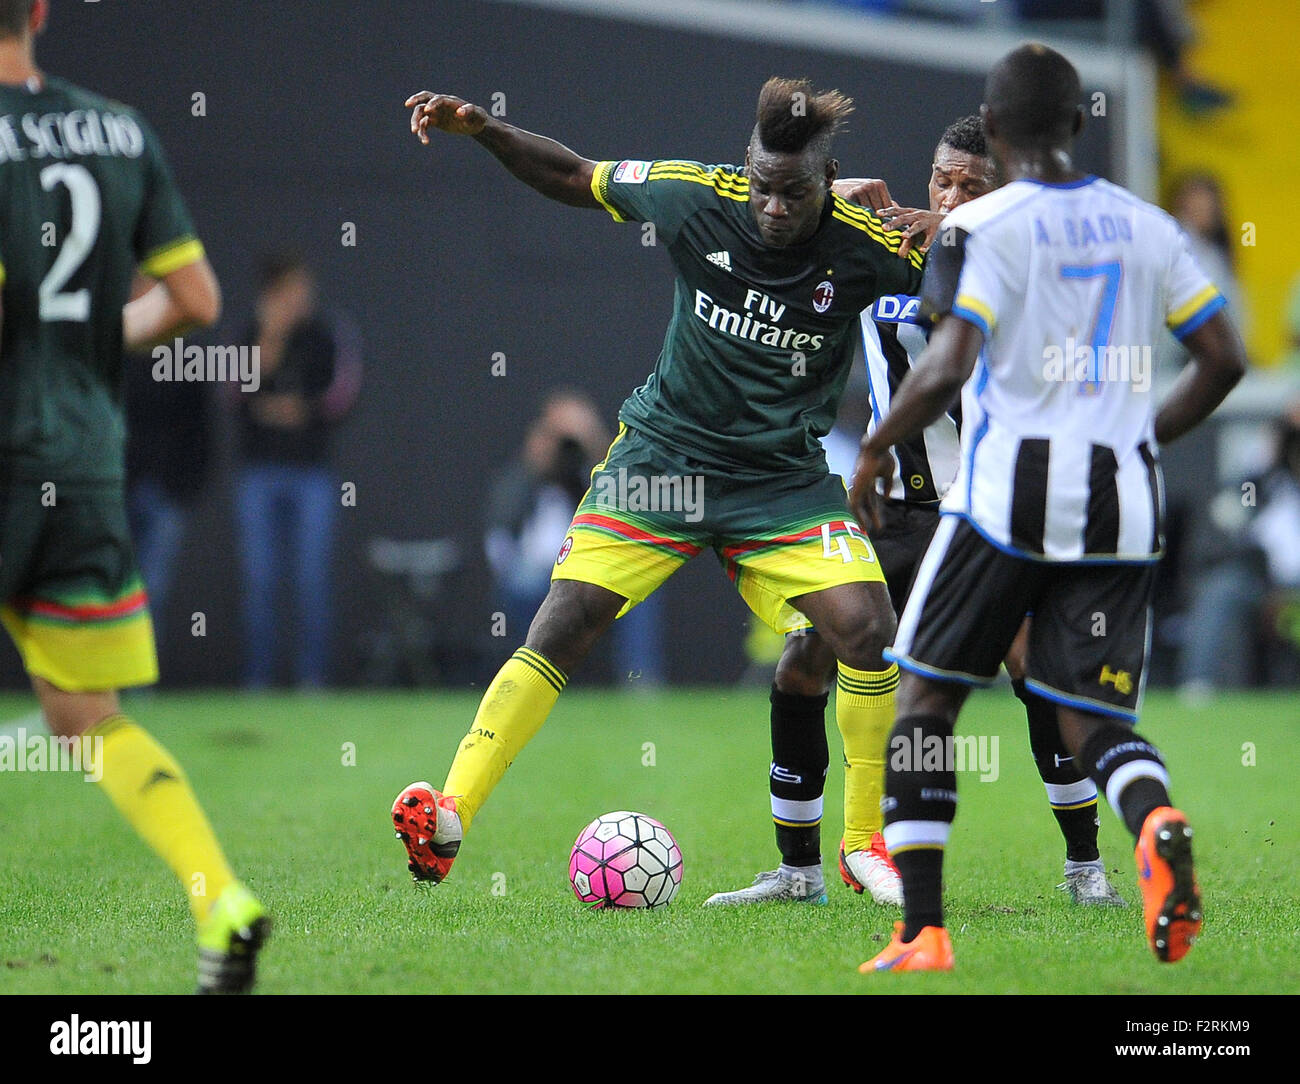 Udine, Italy. 22nd September, 2015. Milan' forward Mario Balotelli (C) fight for the ball with Udinese's defender Andrade Dos Santos Edenilson during the Italian Serie A TIM football match between Udinese Calcio and AC Milan at Friuli Stadium. 22th September 2015. photo Simone Ferraro / Alamy Live News Stock Photo